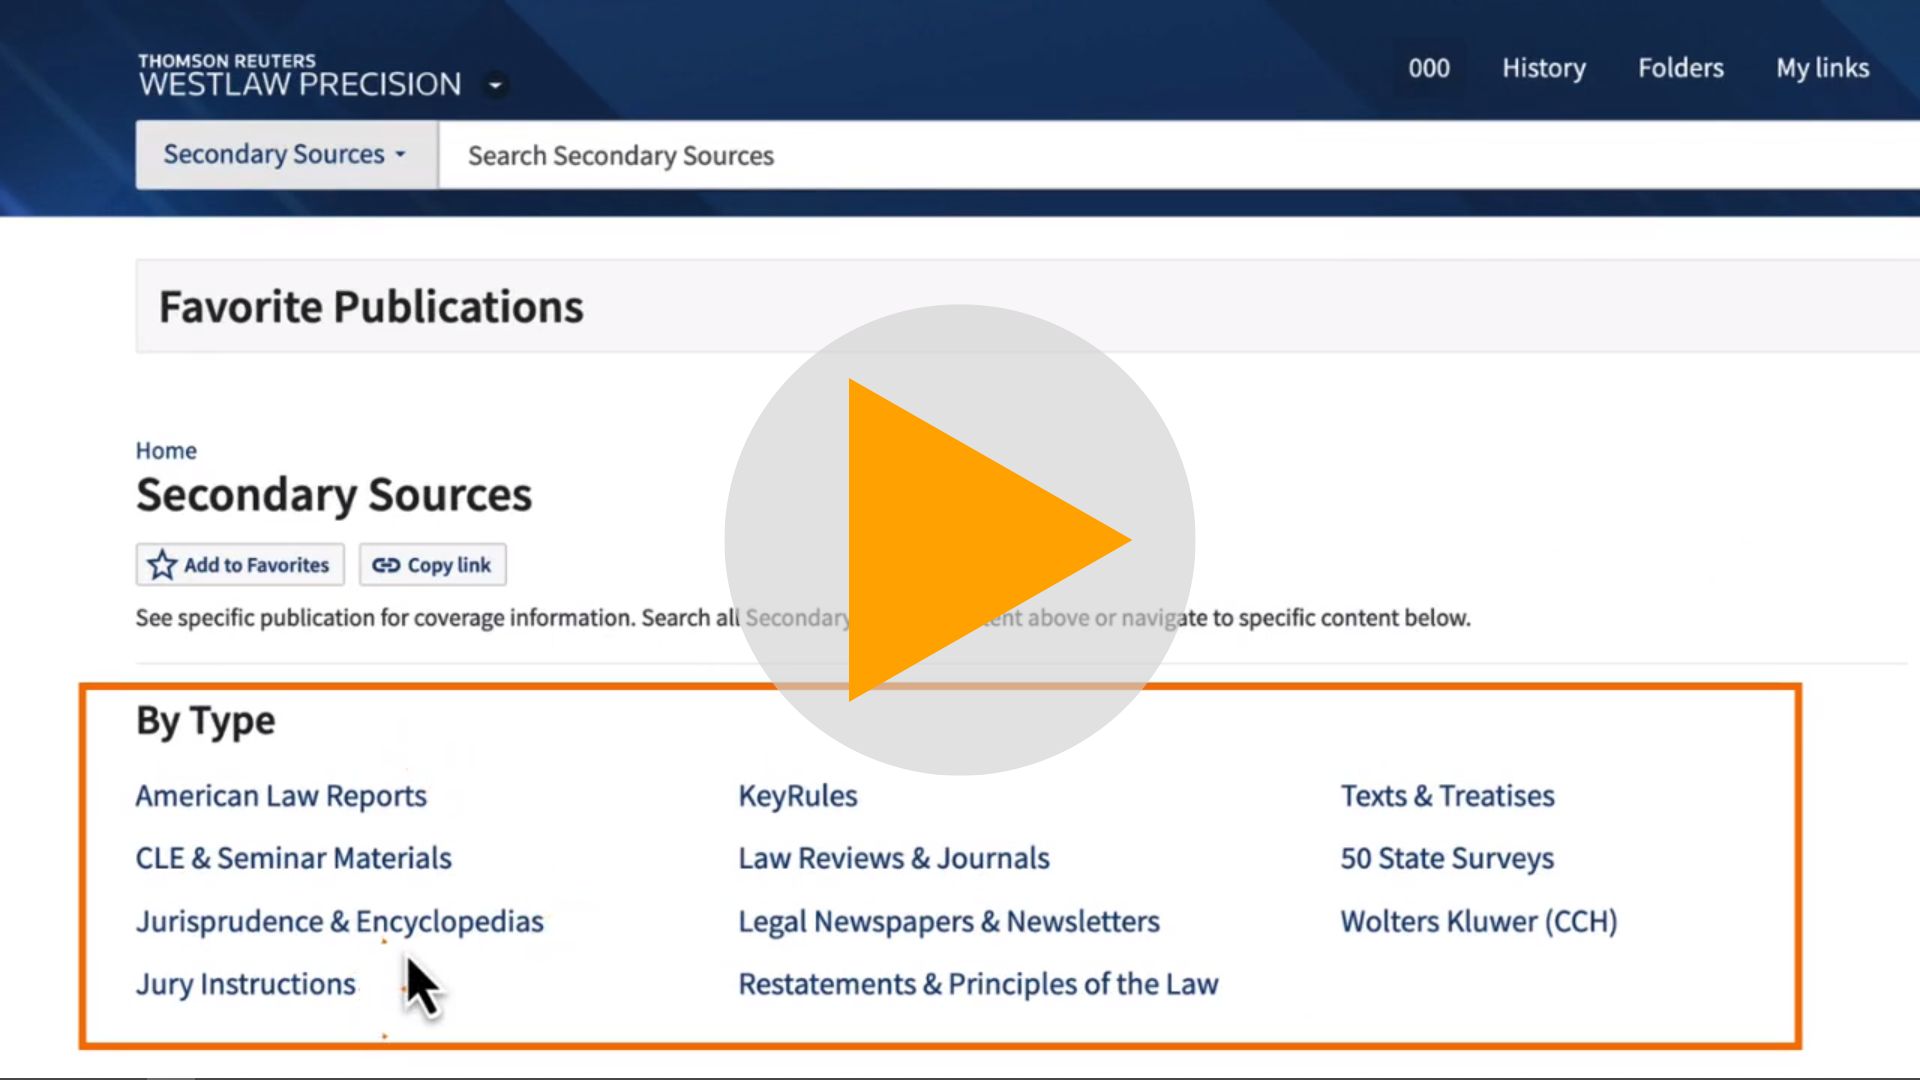 Video Lesson: Basics of Using Secondary Sources on Westlaw